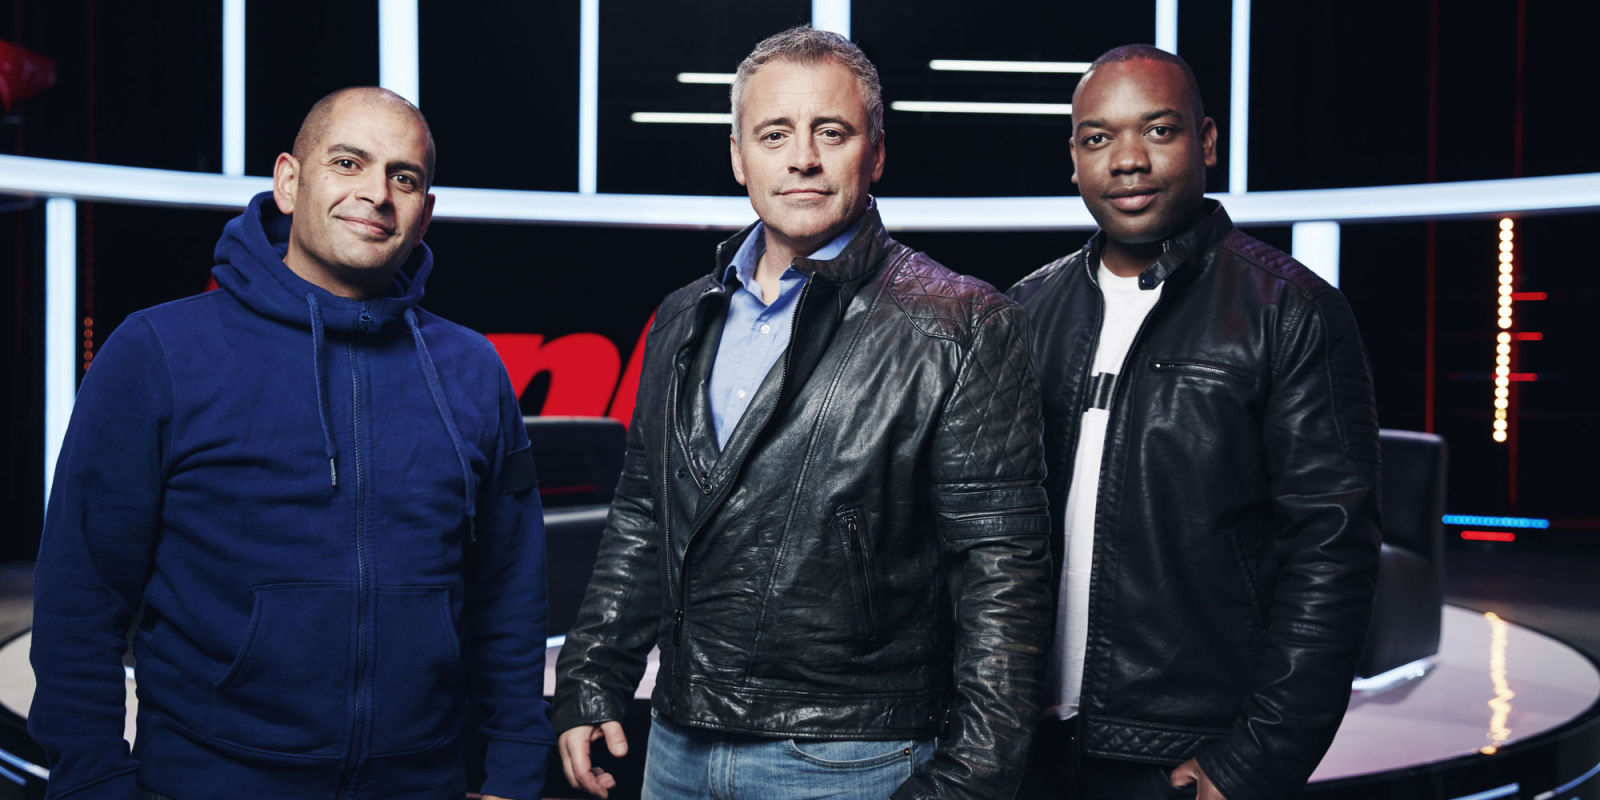 Top Gear High Quality Background on Wallpapers Vista